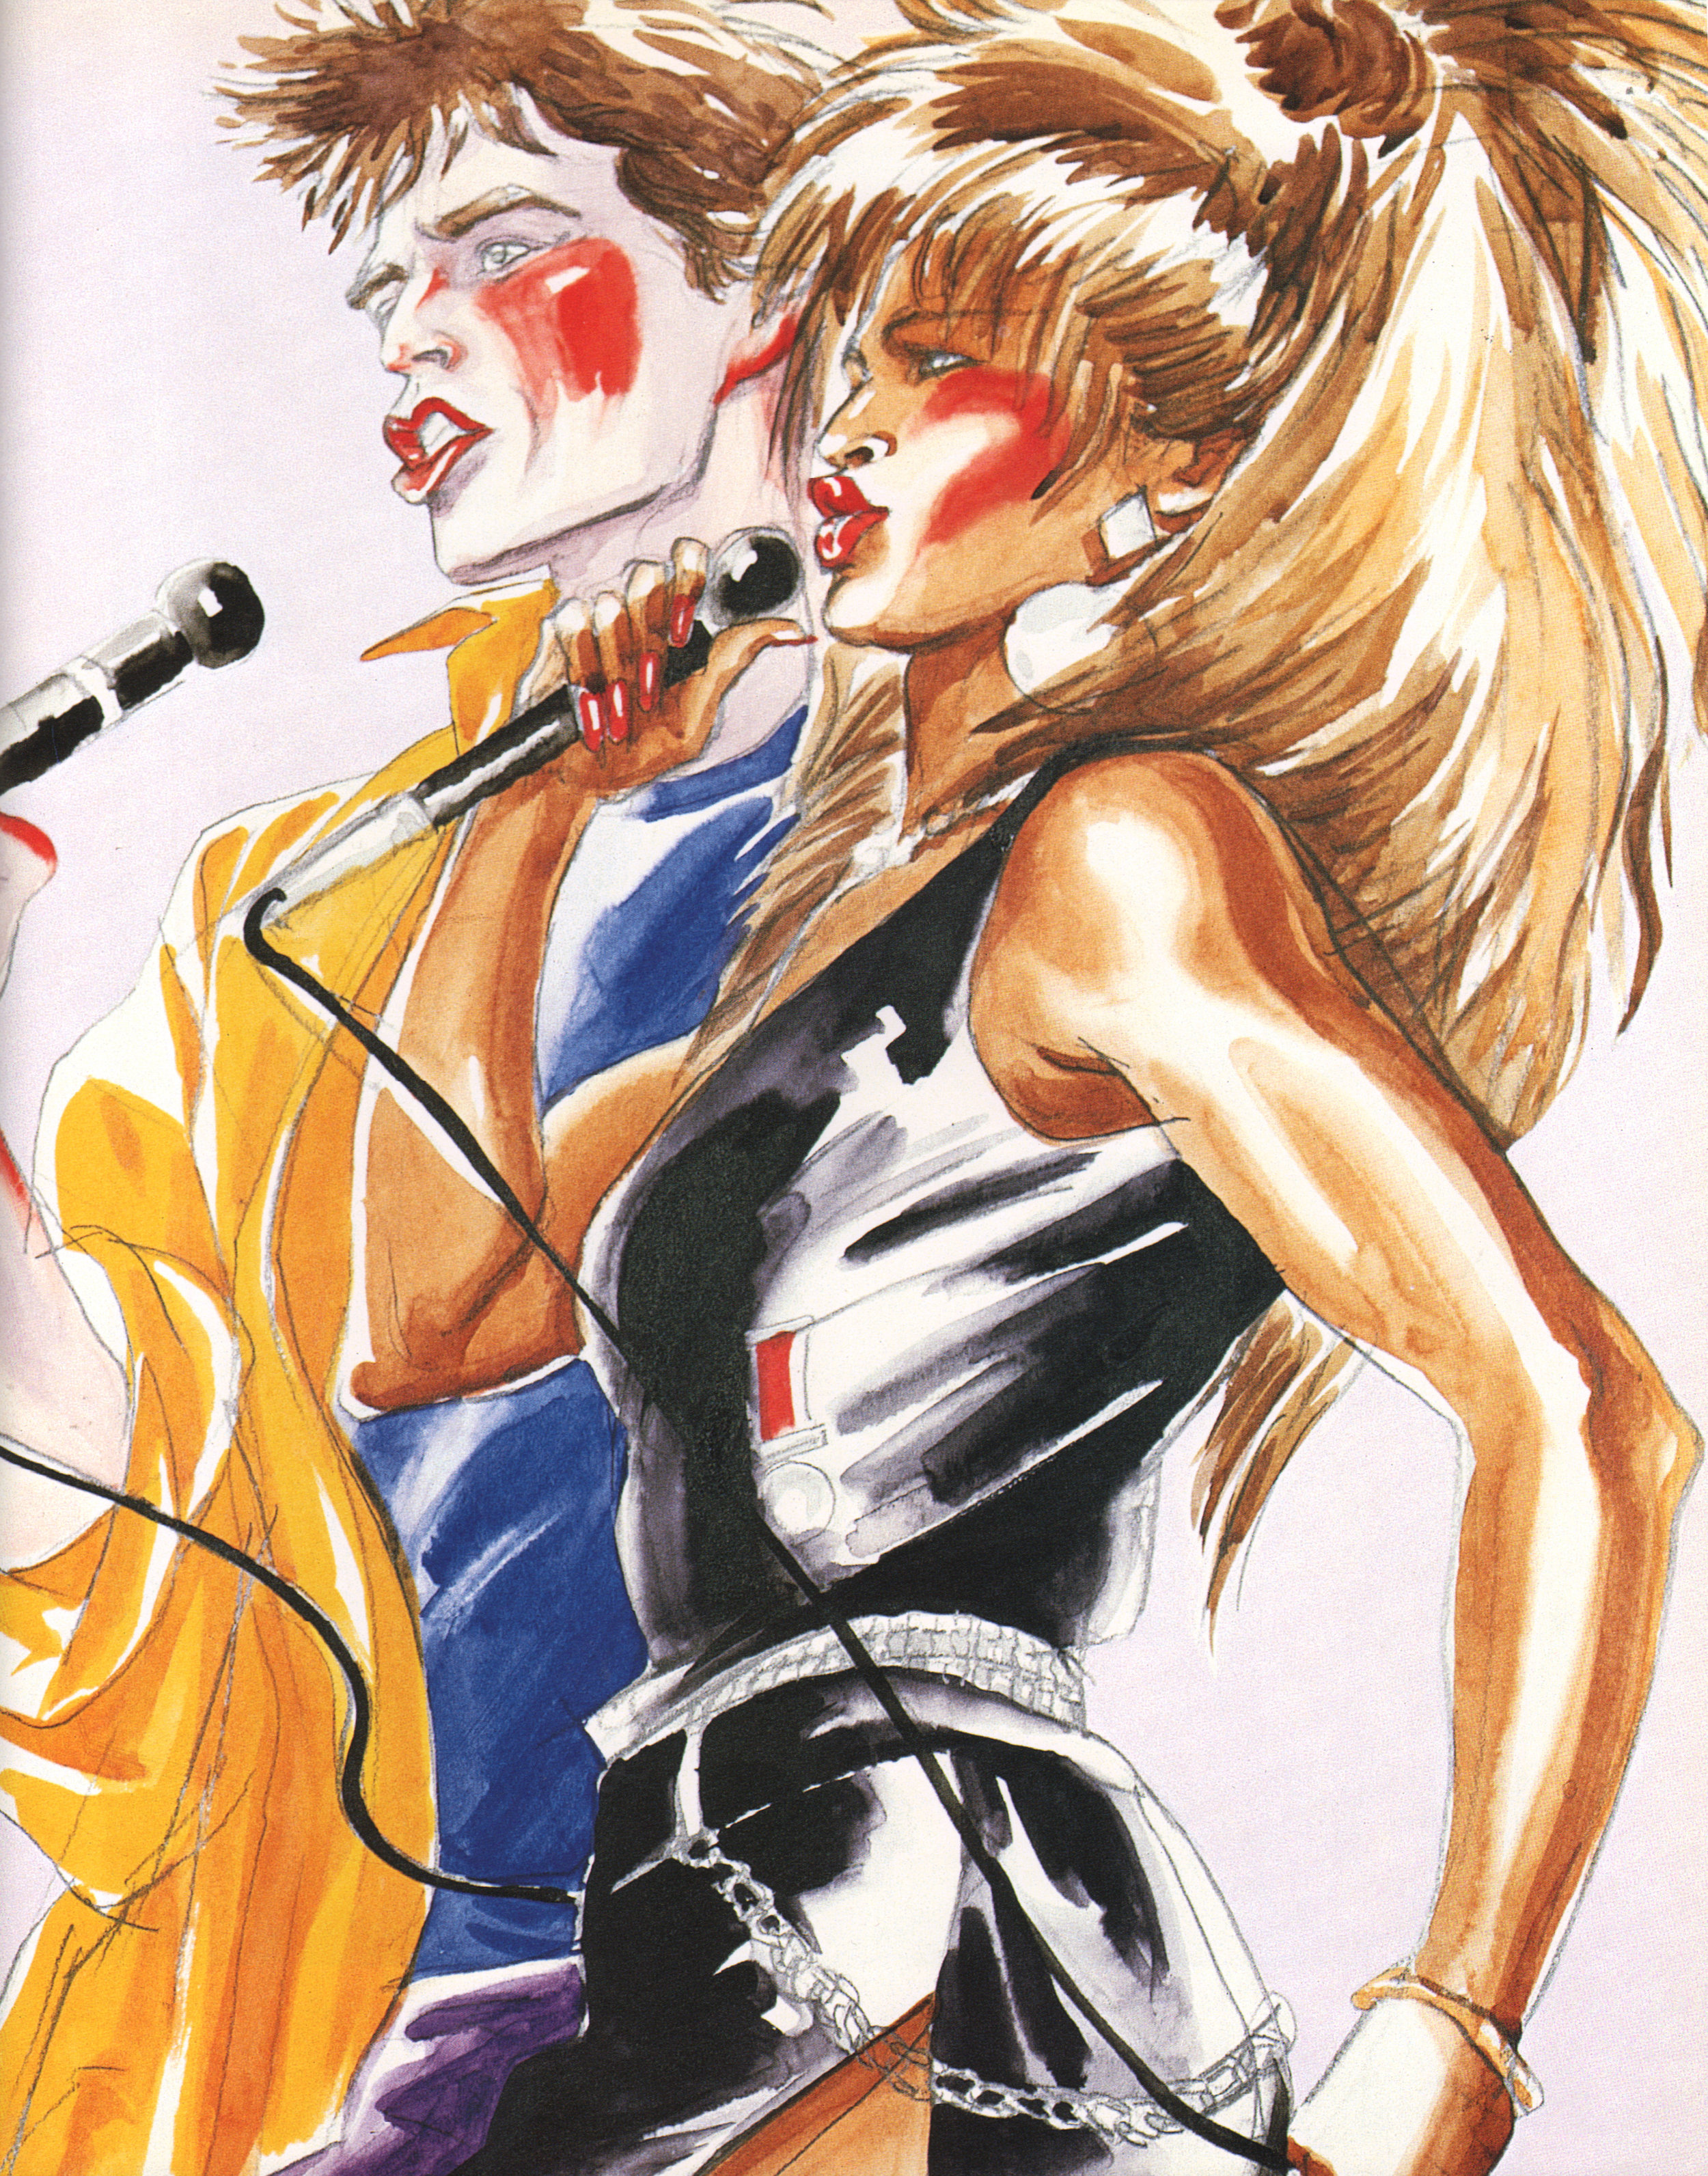  Antonio Lopez, Tina Turner and Mick Jagger, 1986, Pencil/watercolor on paper, 17” x 14”, Courtesy of the Estate of Antonio Lopez &amp;&nbsp;Juan Ramos. Reproduced with permission from Museo del Barrio. 